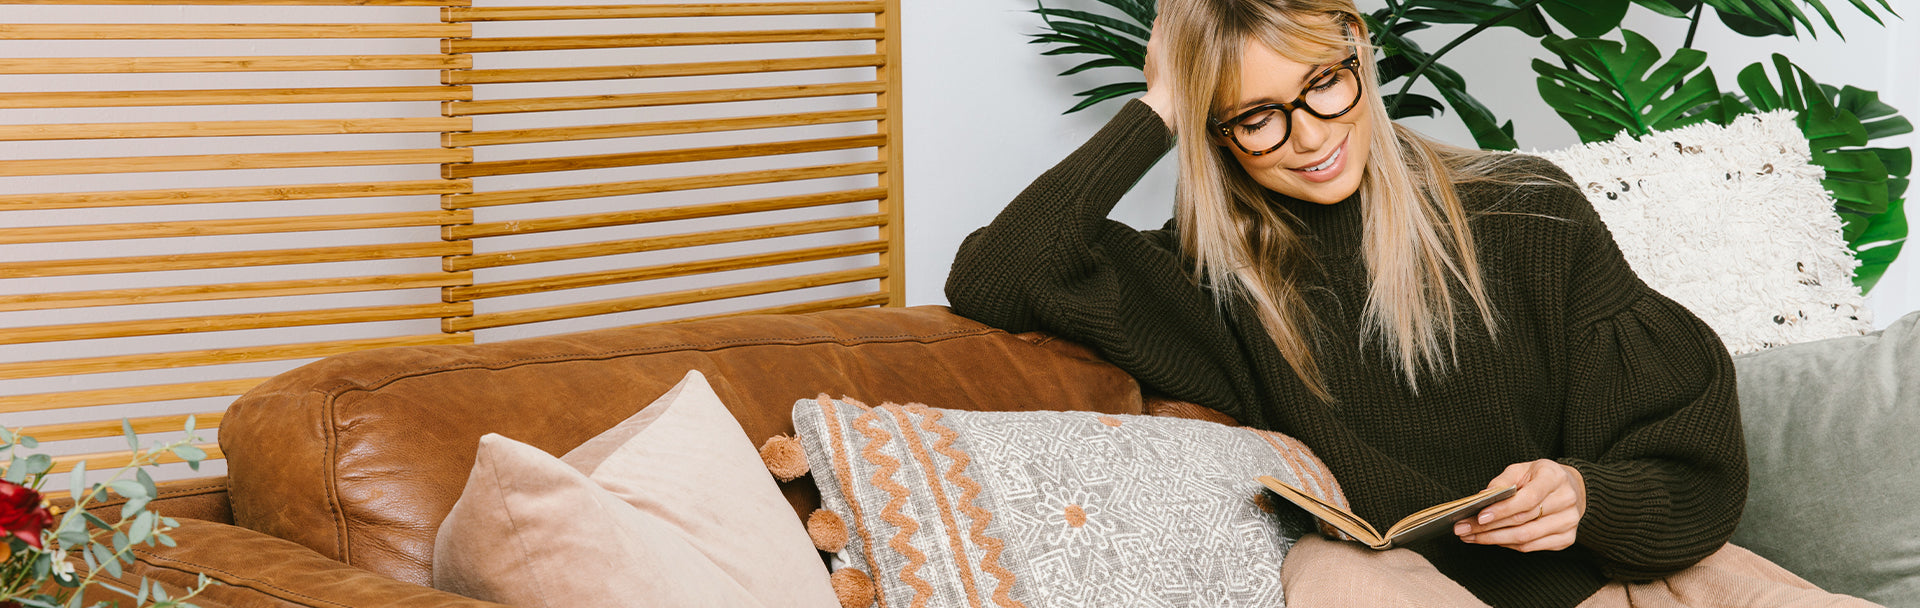 Blonde woman wearing Peepers reading glasses and reading a book on the couch